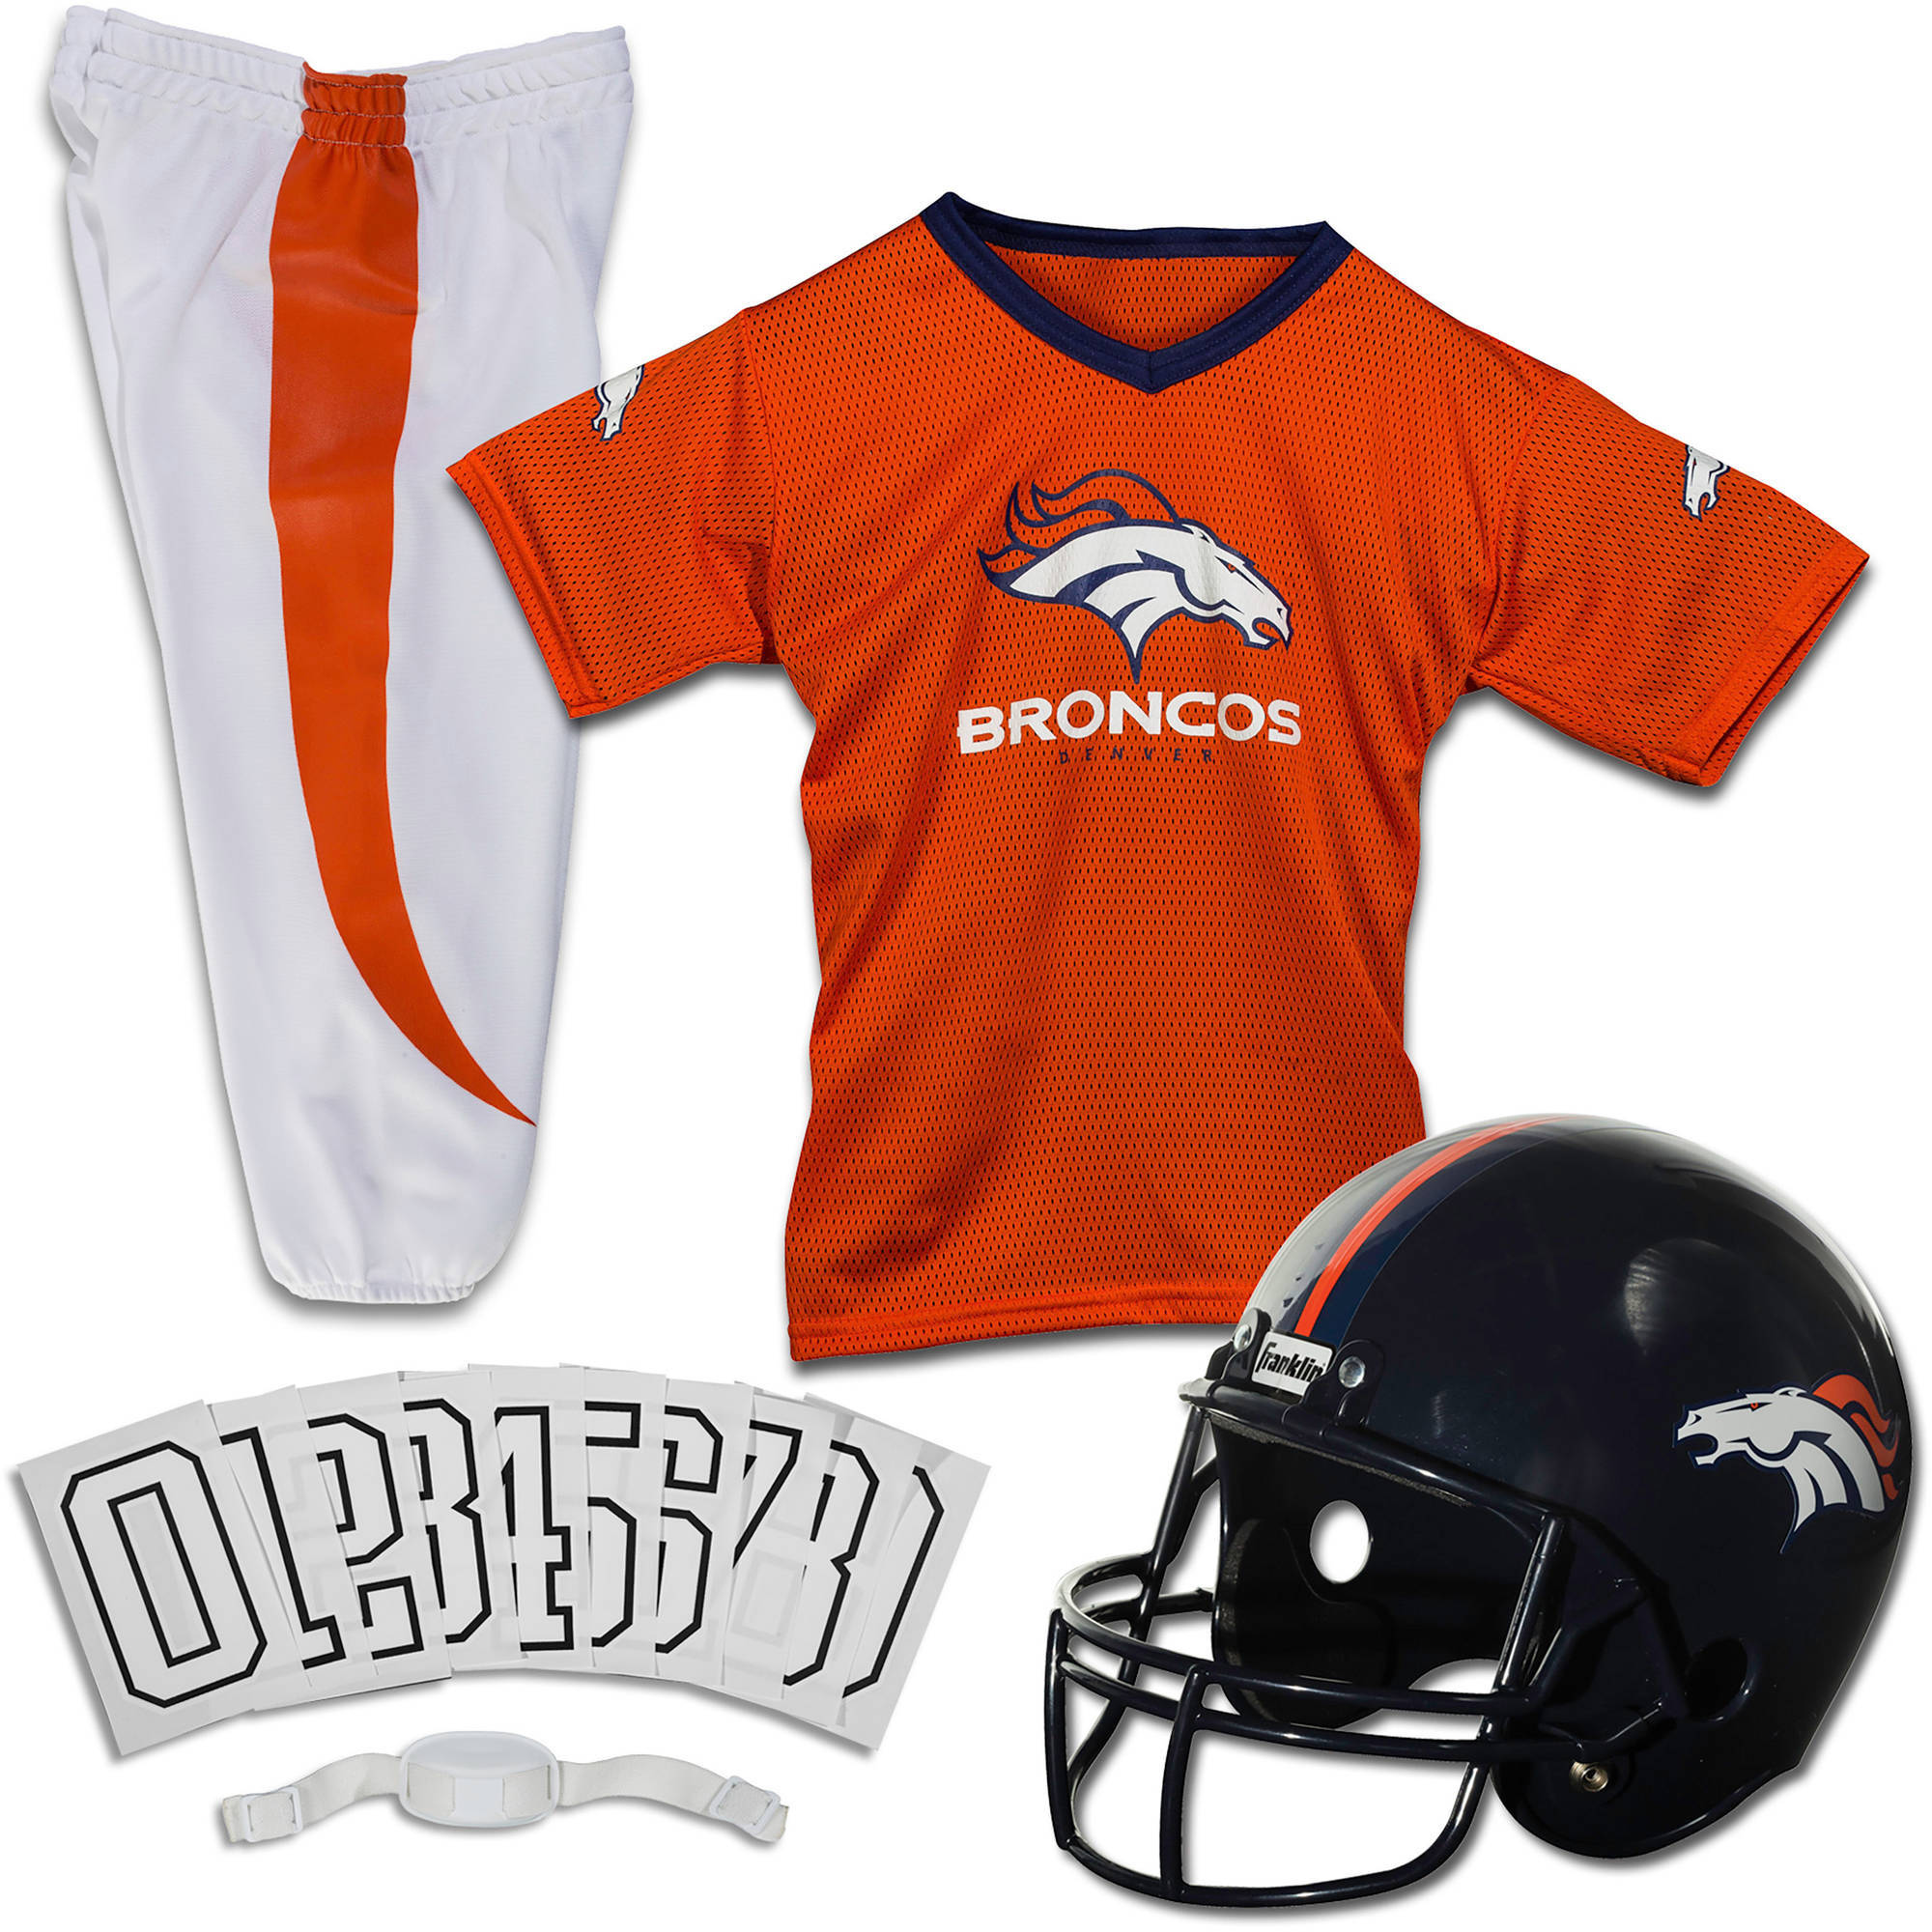 Franklin Sports NFL Youth Deluxe Uniform/Costume Football Set (Choose Team and Size) - image 1 of 5